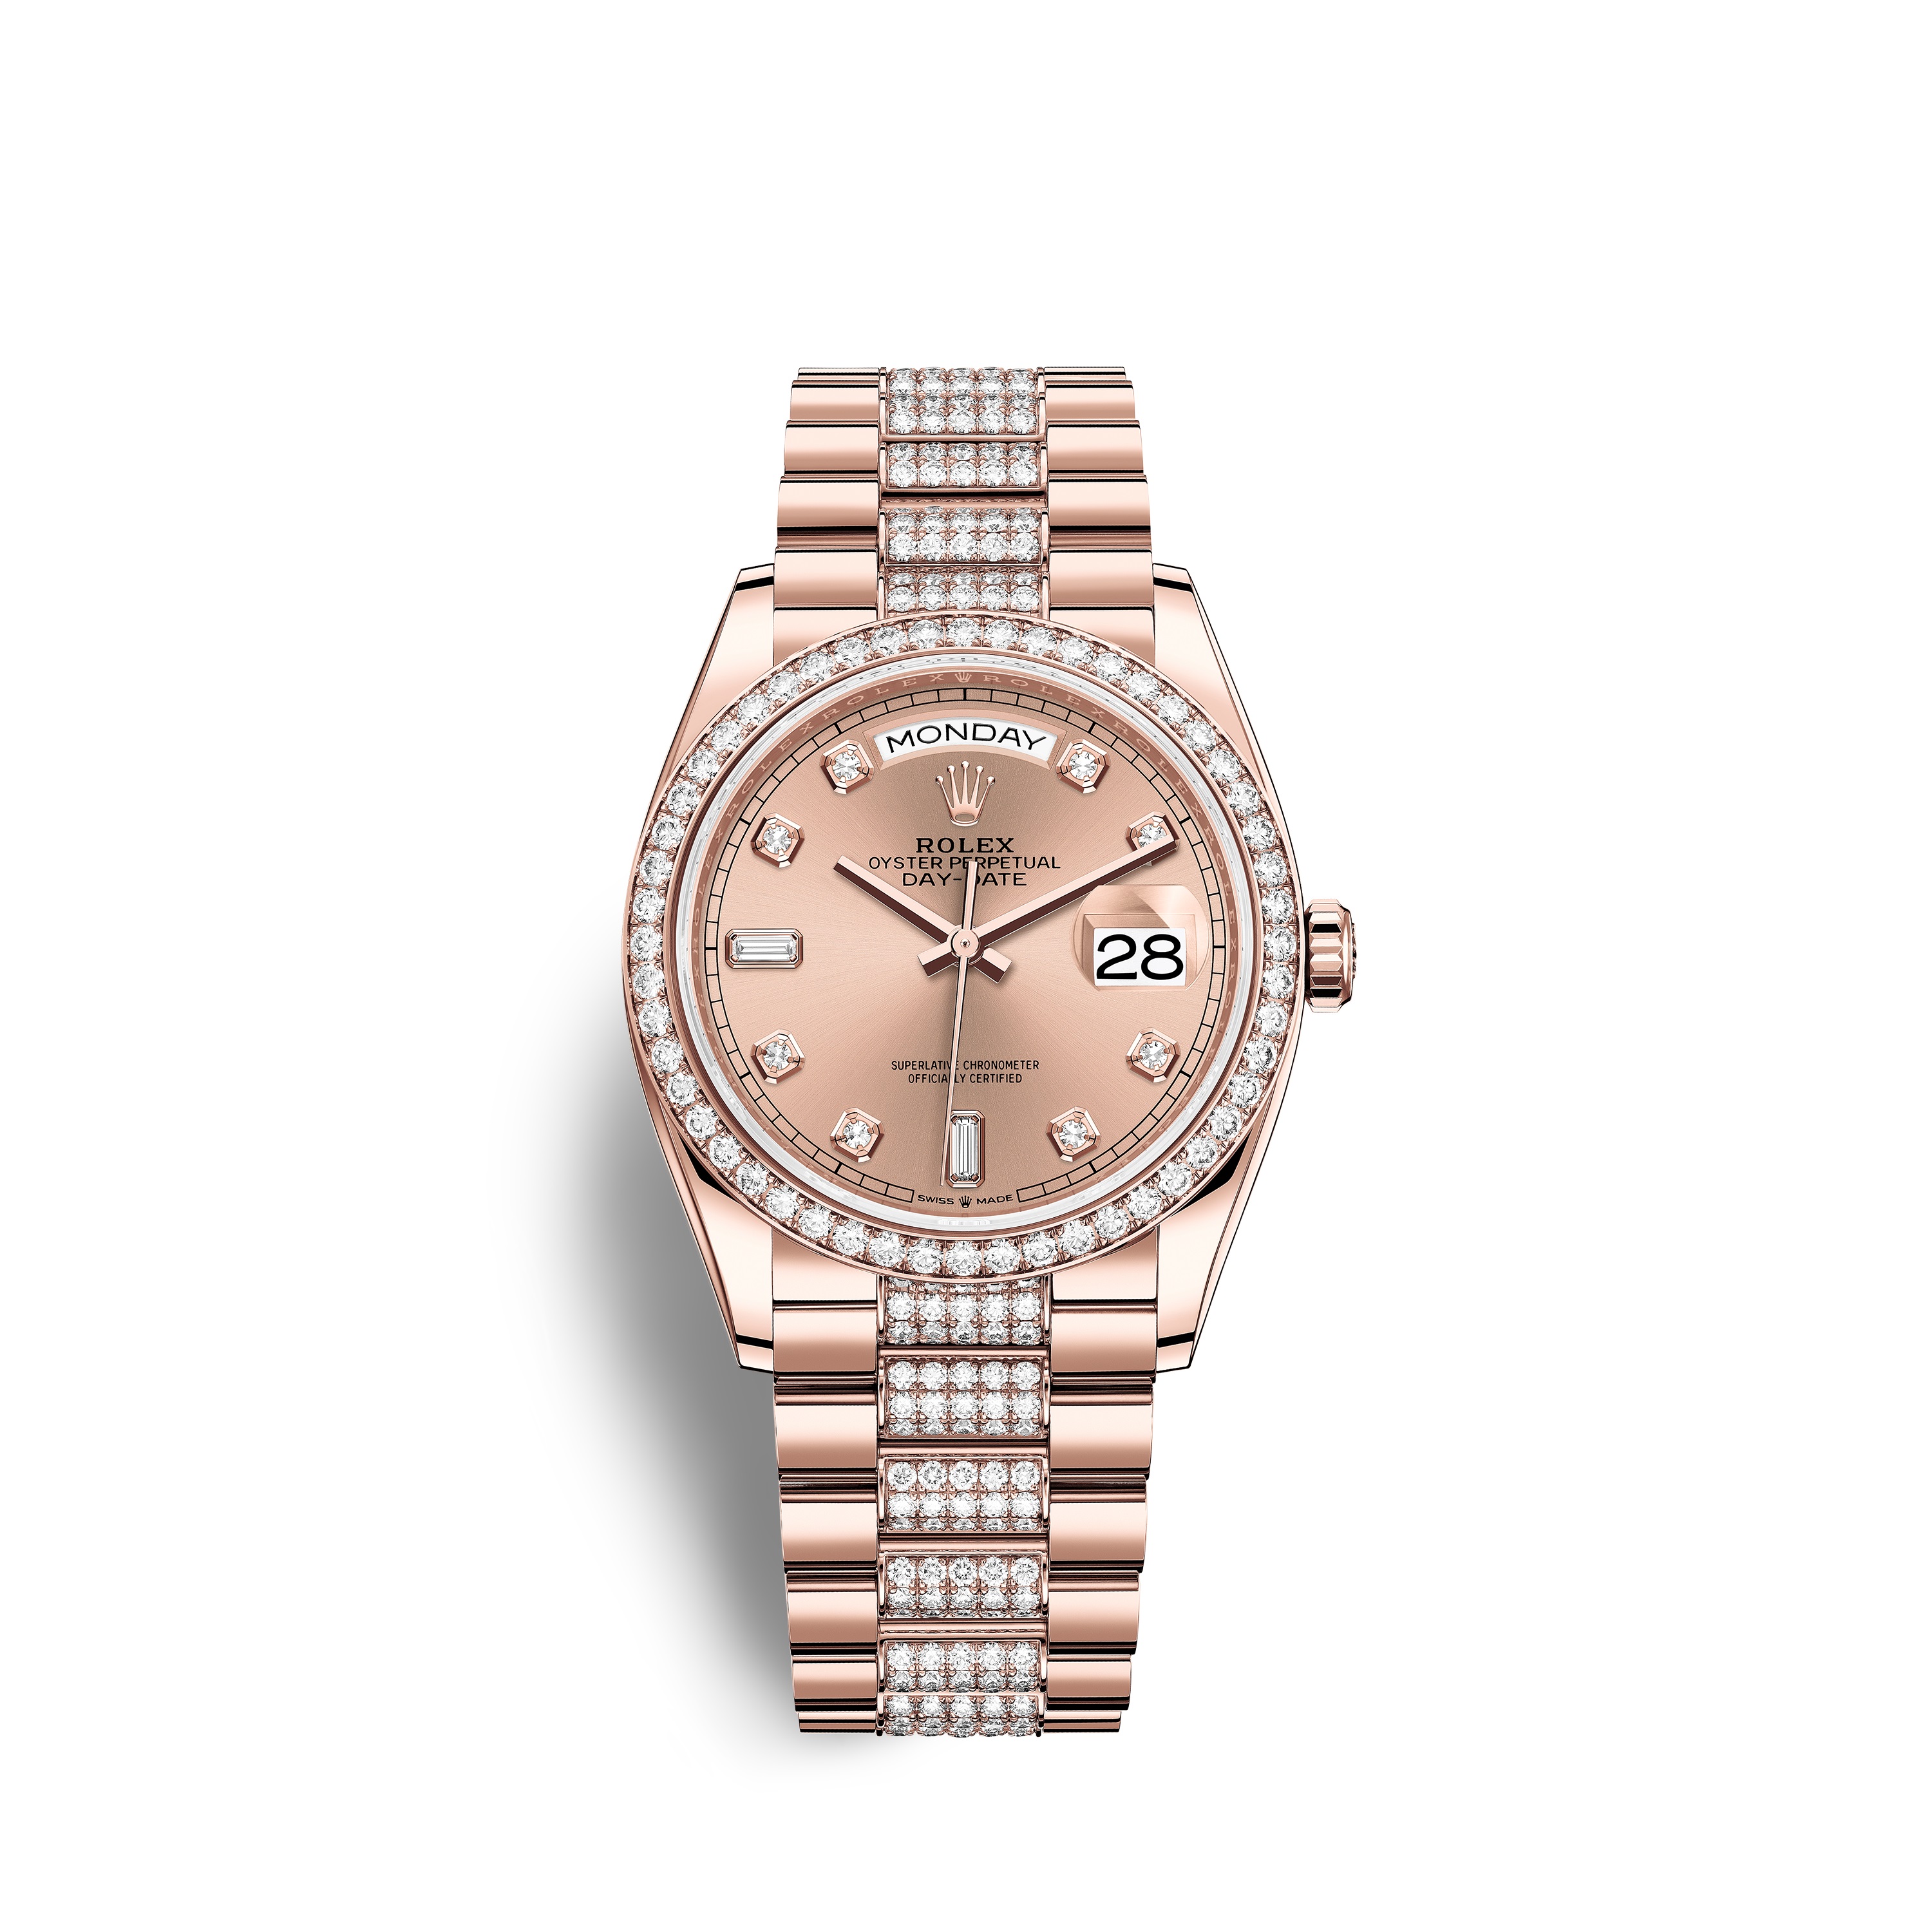 Day-Date 36 128345RBR Rose Gold & Diamonds Watch (Rosé Colour Set with Diamonds)